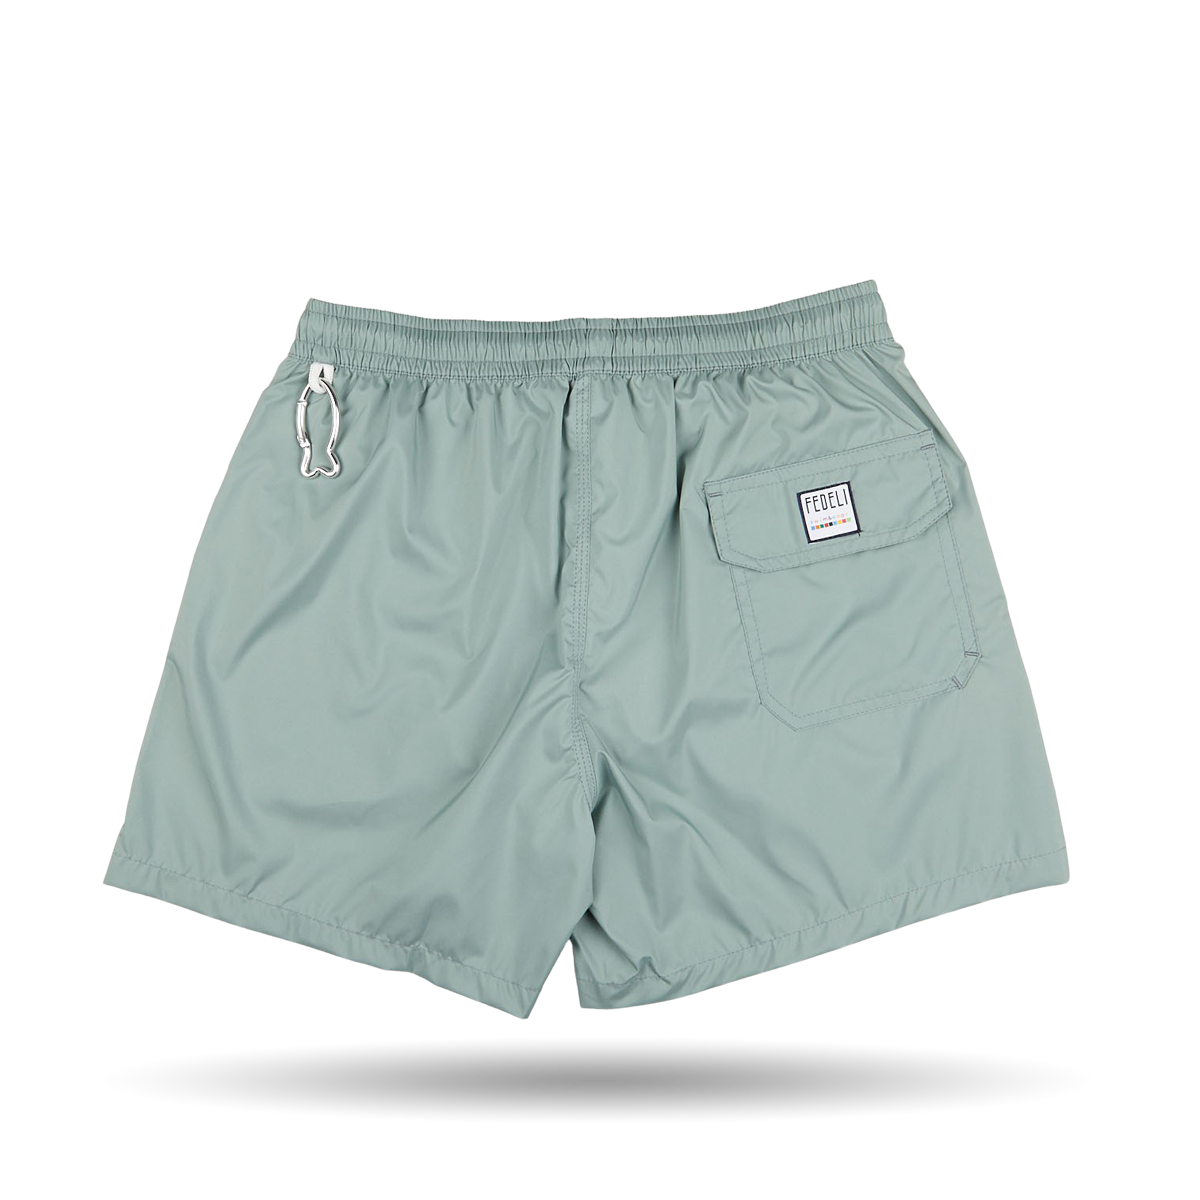 A pair of Sage Green Madeira Microfiber swim shorts by Fedeli in light teal quick-dry microfiber, featuring an elastic waistband, a white embroidered logo on the left leg, and a patch pocket with a label on.